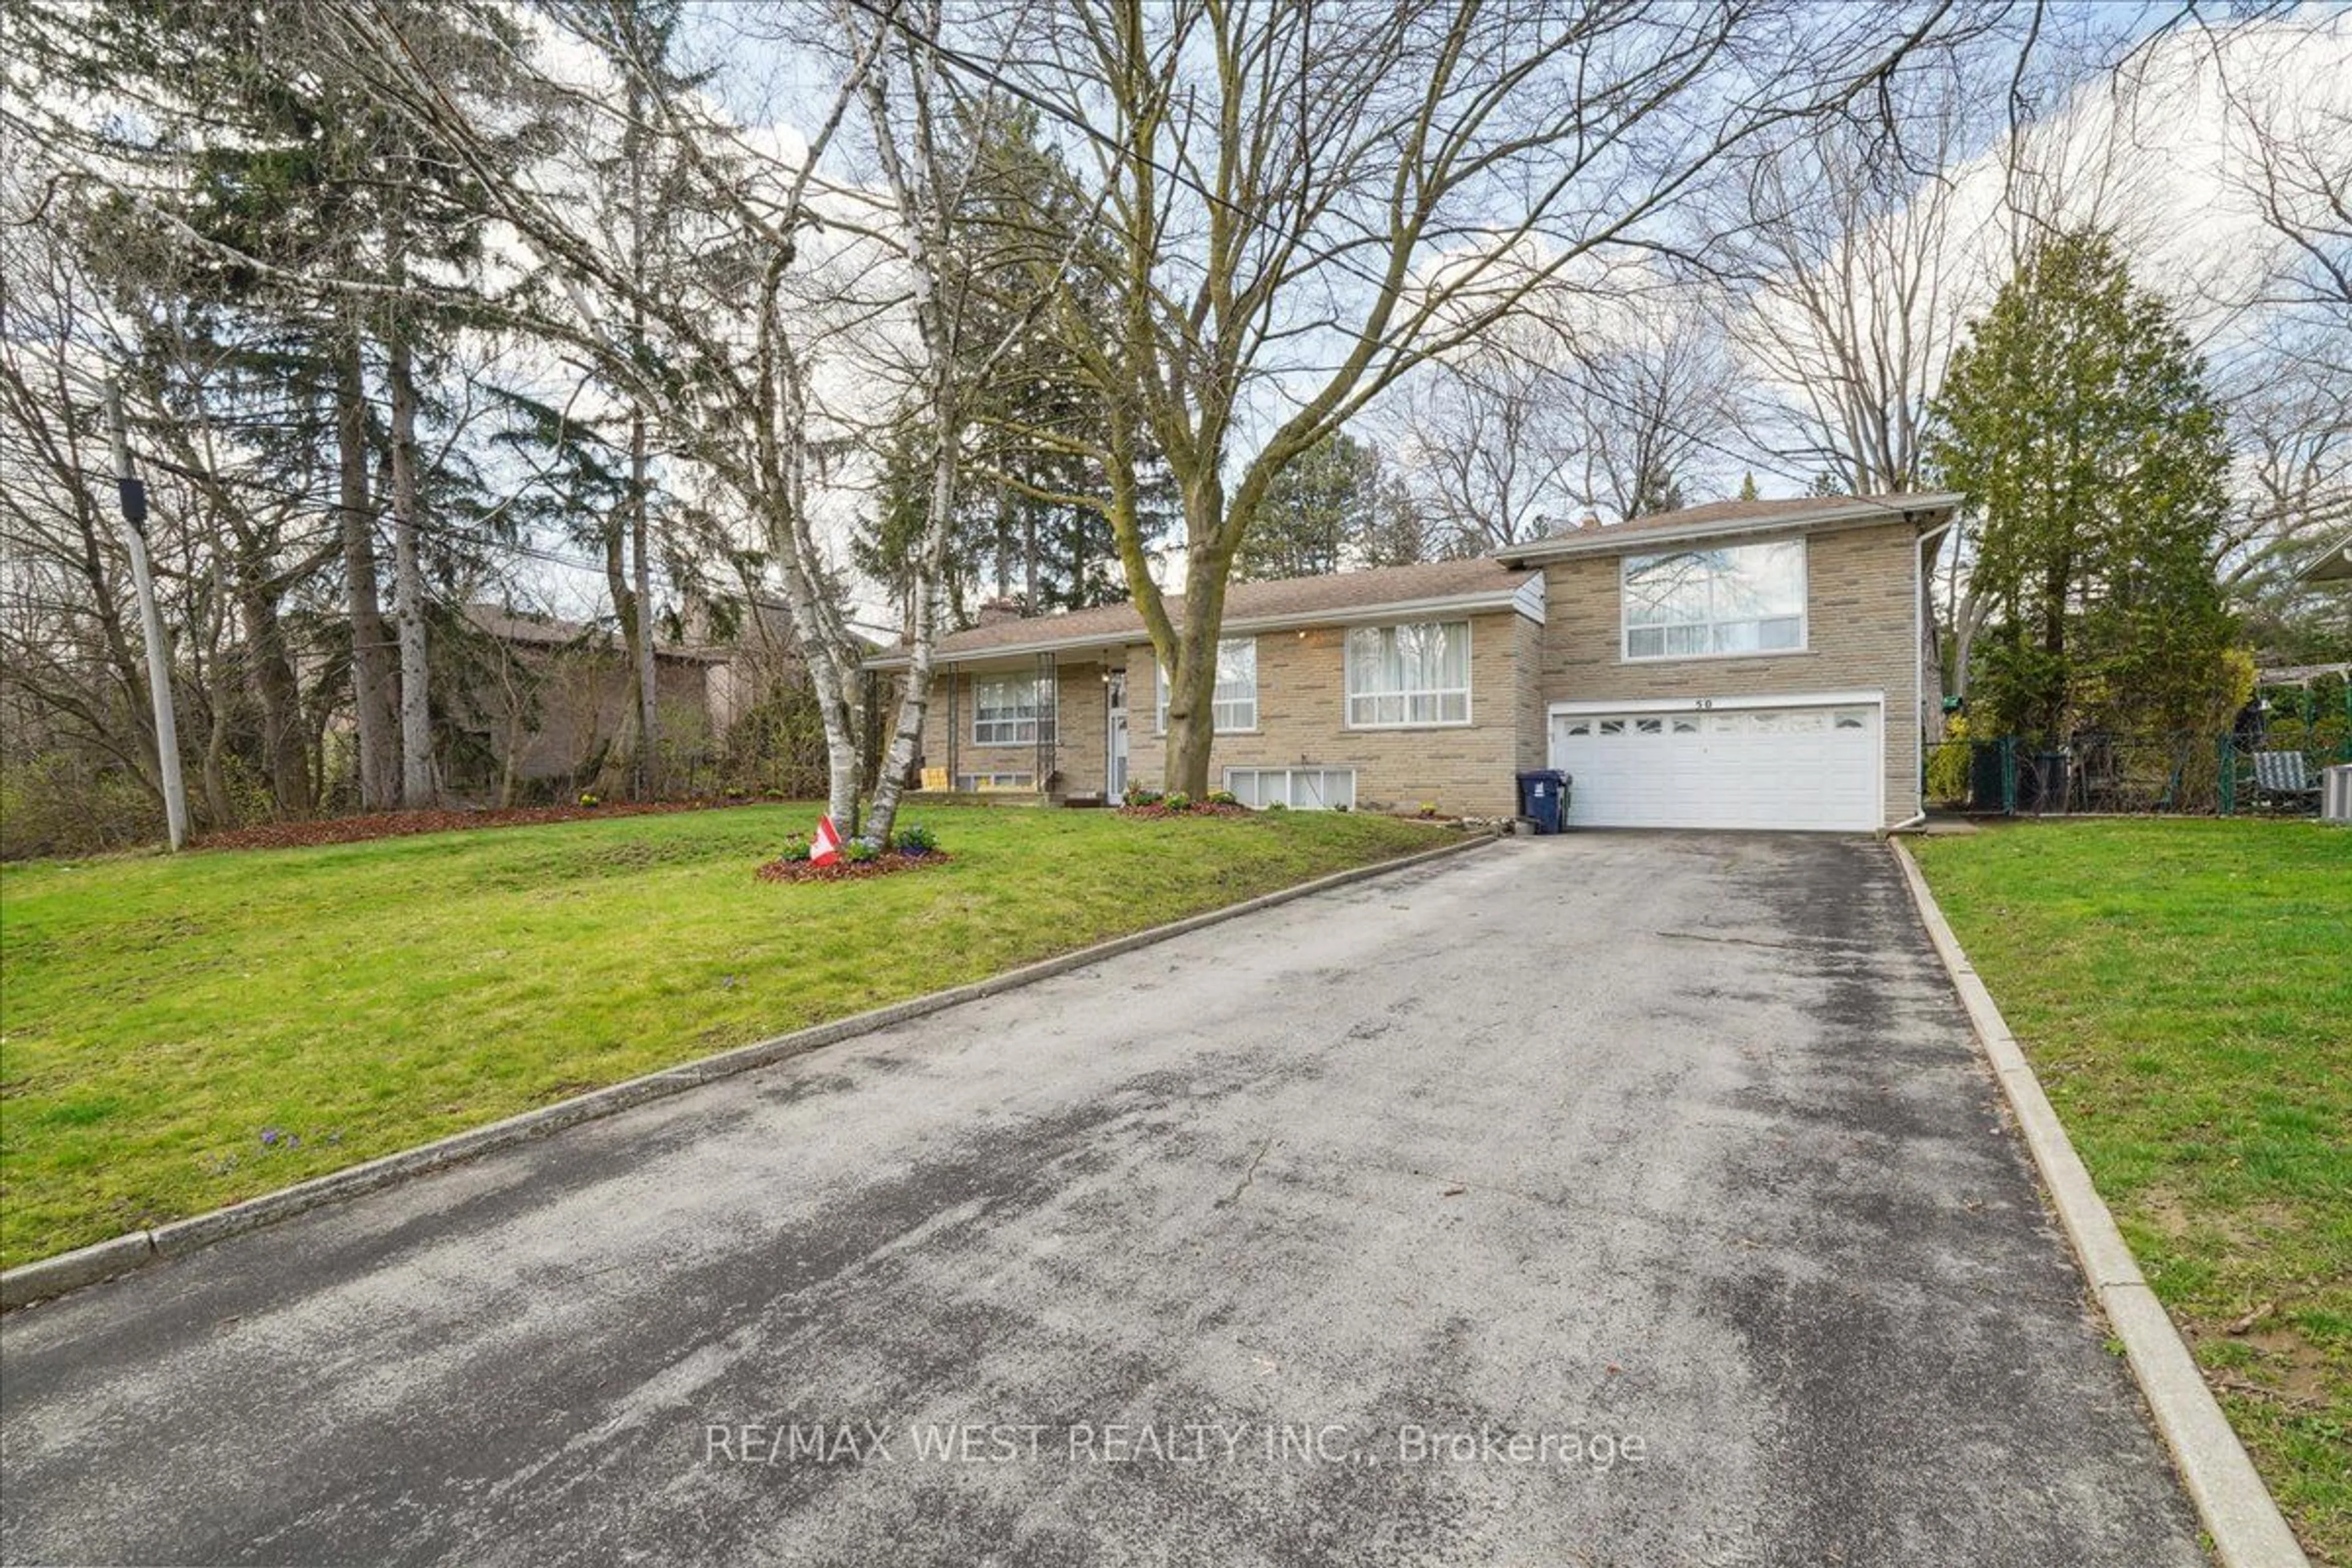 Frontside or backside of a home for 50 Claywood Rd, Toronto Ontario M2N 2R2